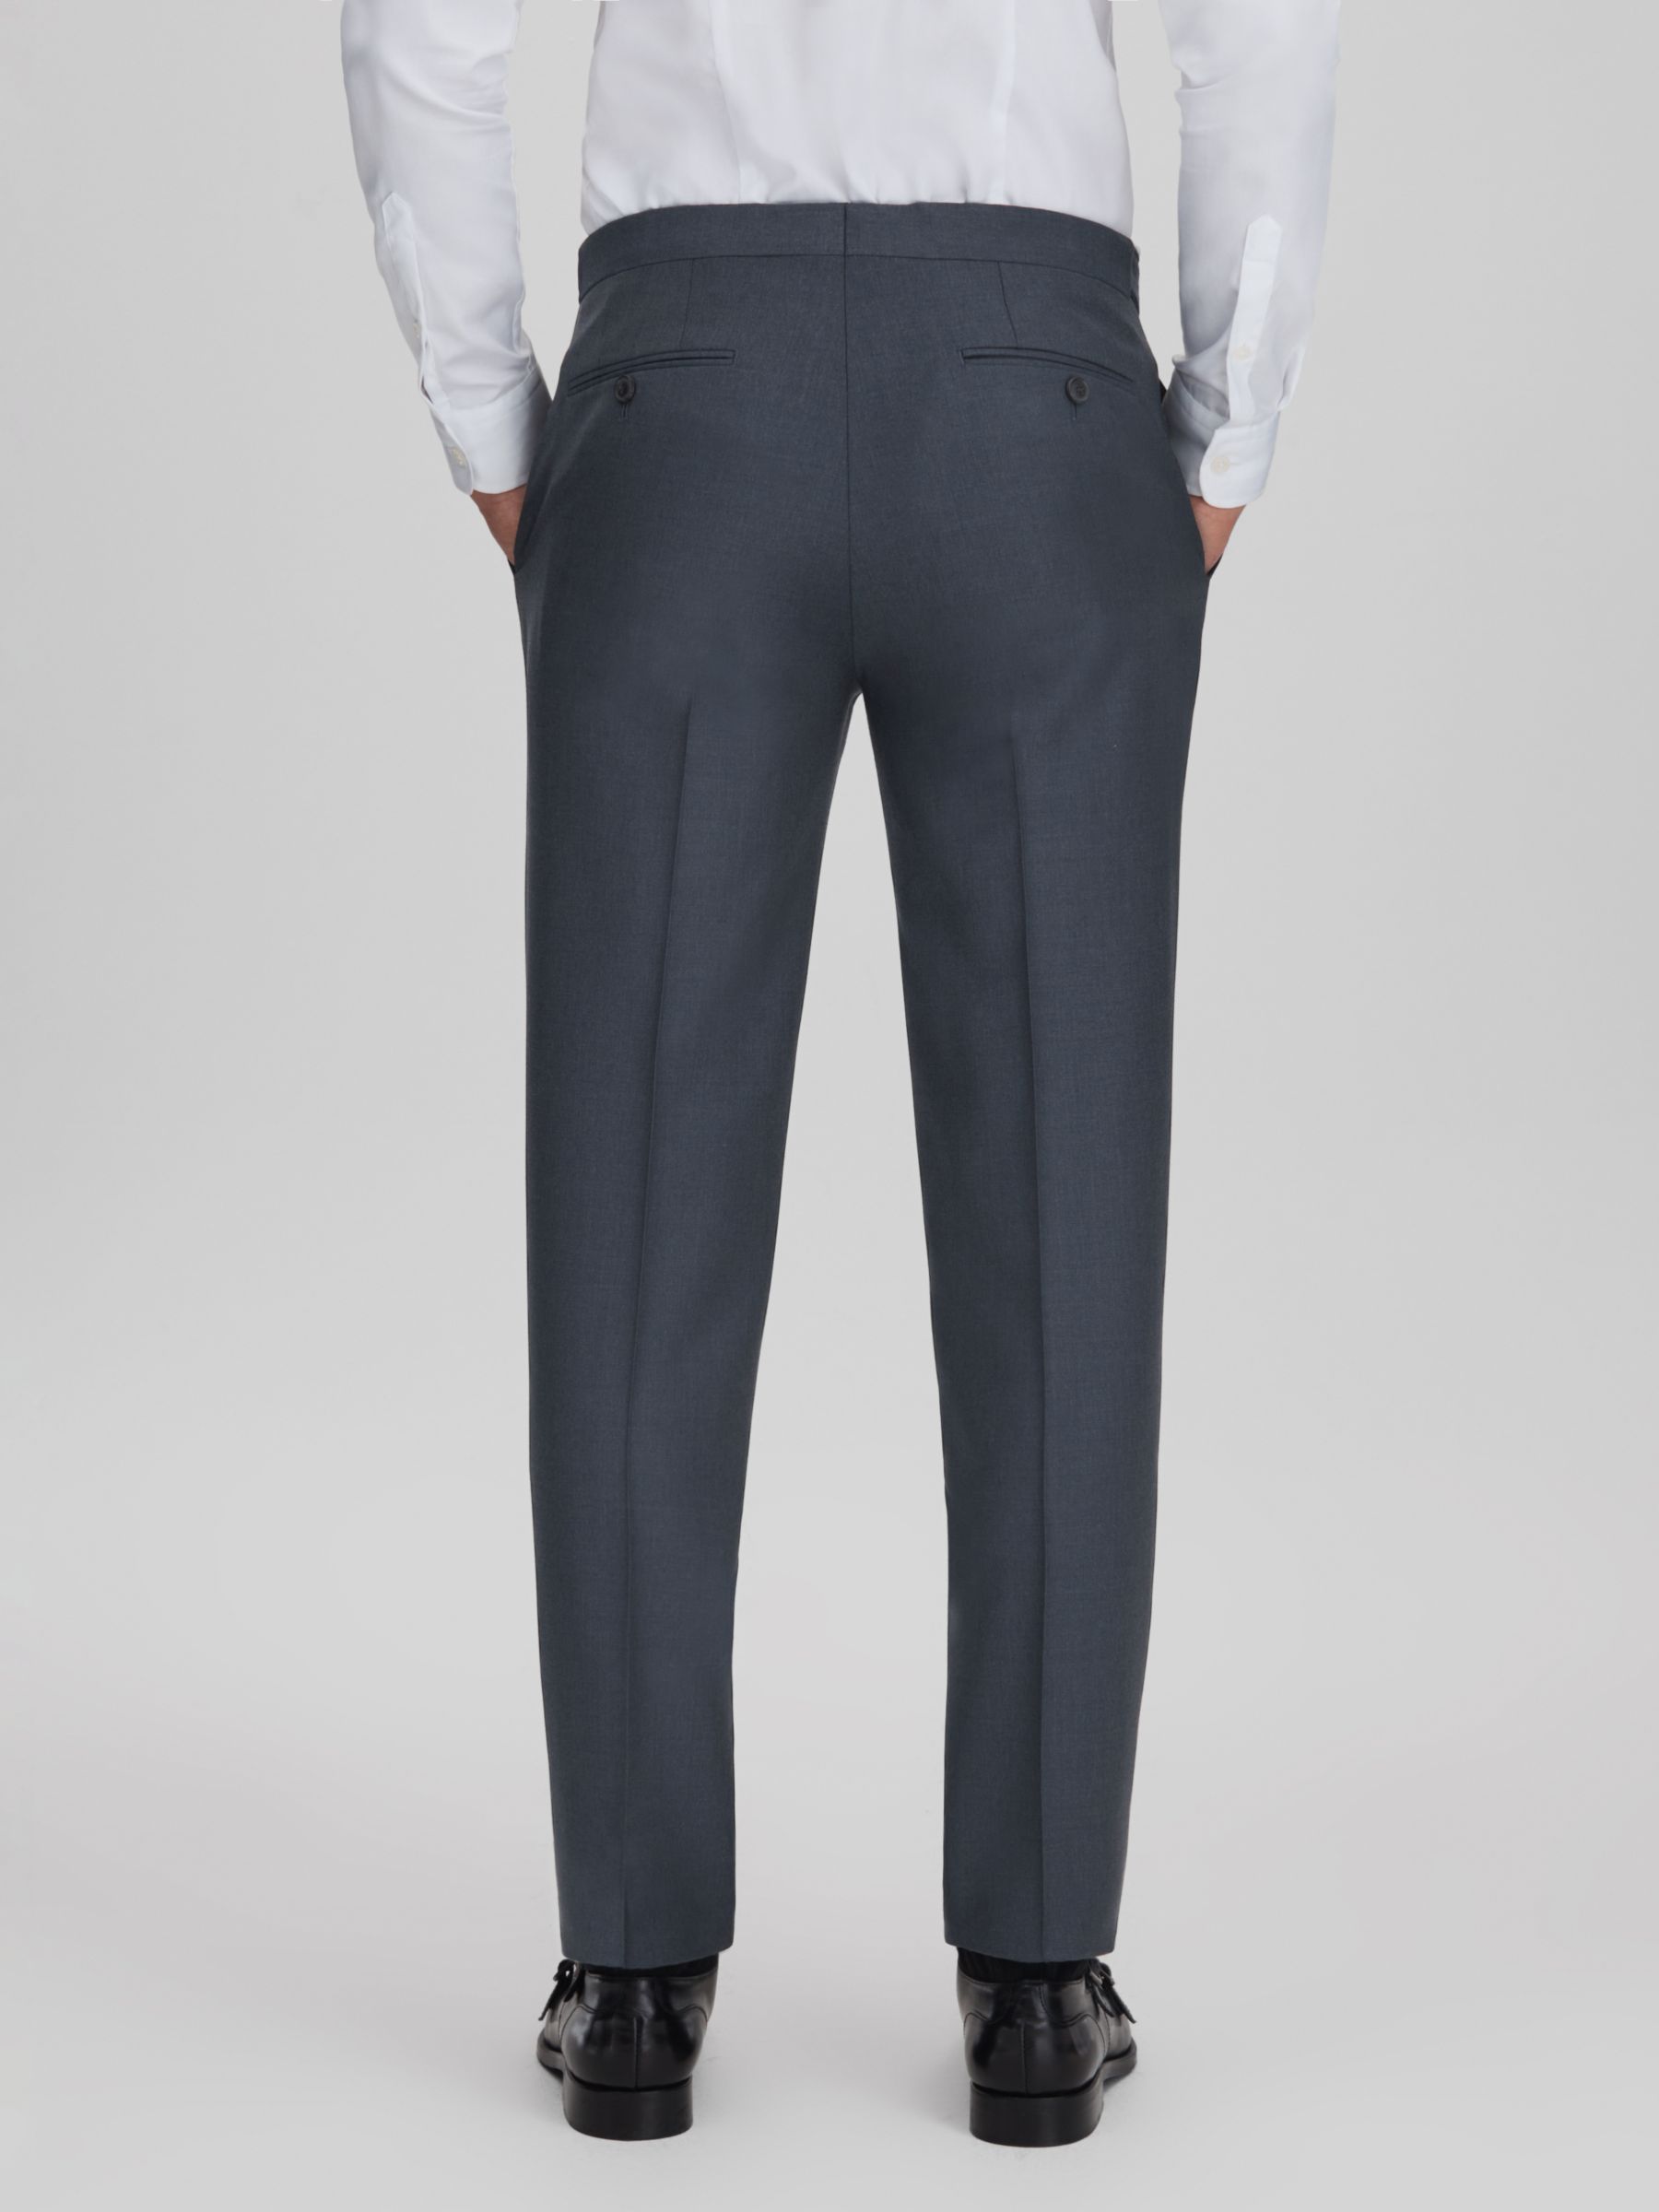 Reiss Humble Wool Tailored Suit Trousers, Airforce Blue, 32R